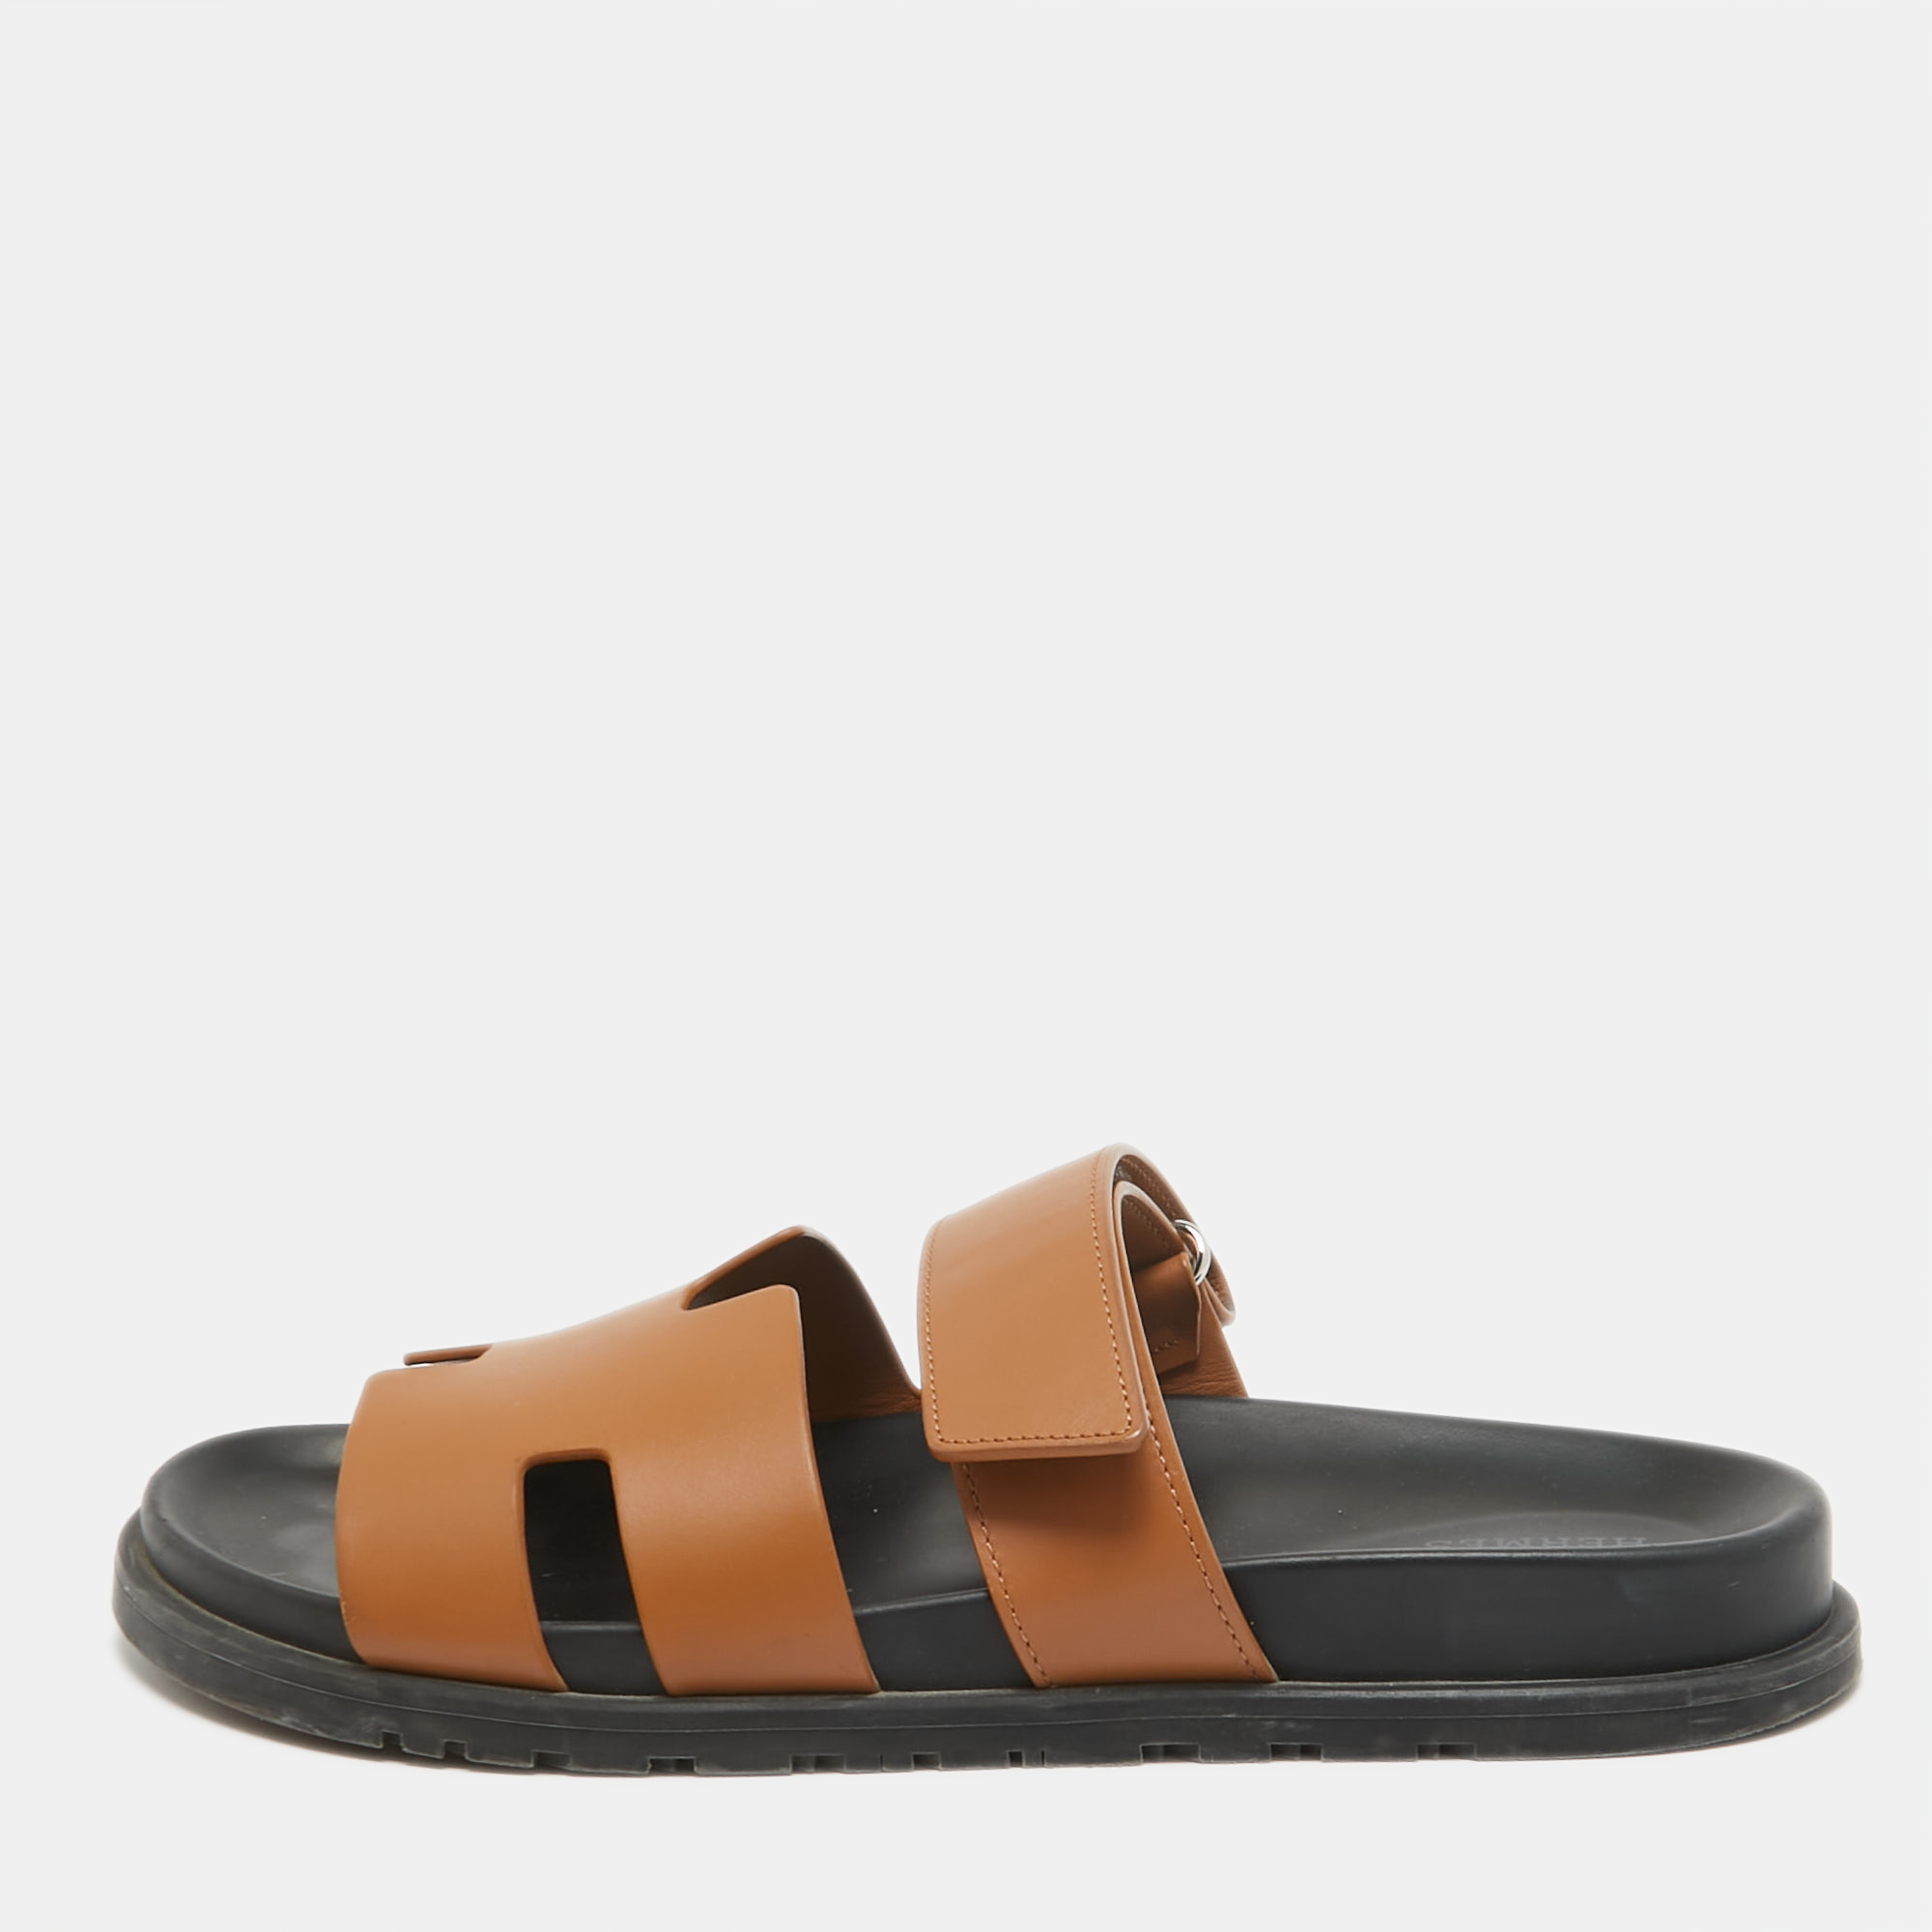 Pre-owned Hermes Brown Leather Chypre Sandals Size 41